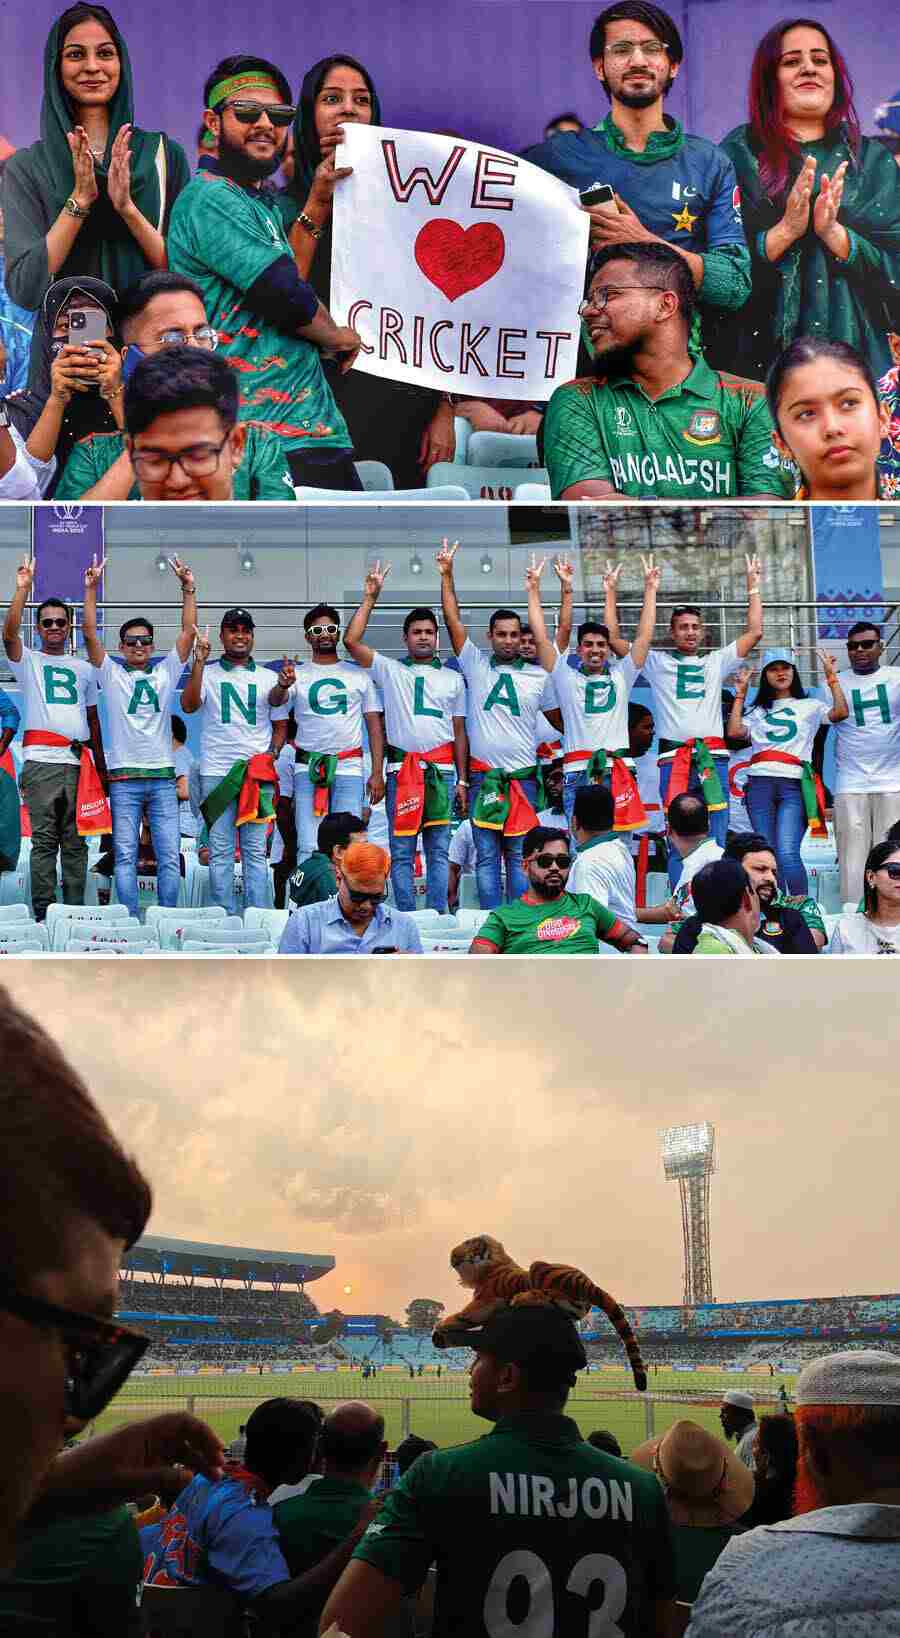 Cricket fans of Bangladesh and Pakistan squads gathered at Eden Gardens to cheer for their respective teams in the ICC World Cup match on Tuesday. Team India supporters were also spotted 